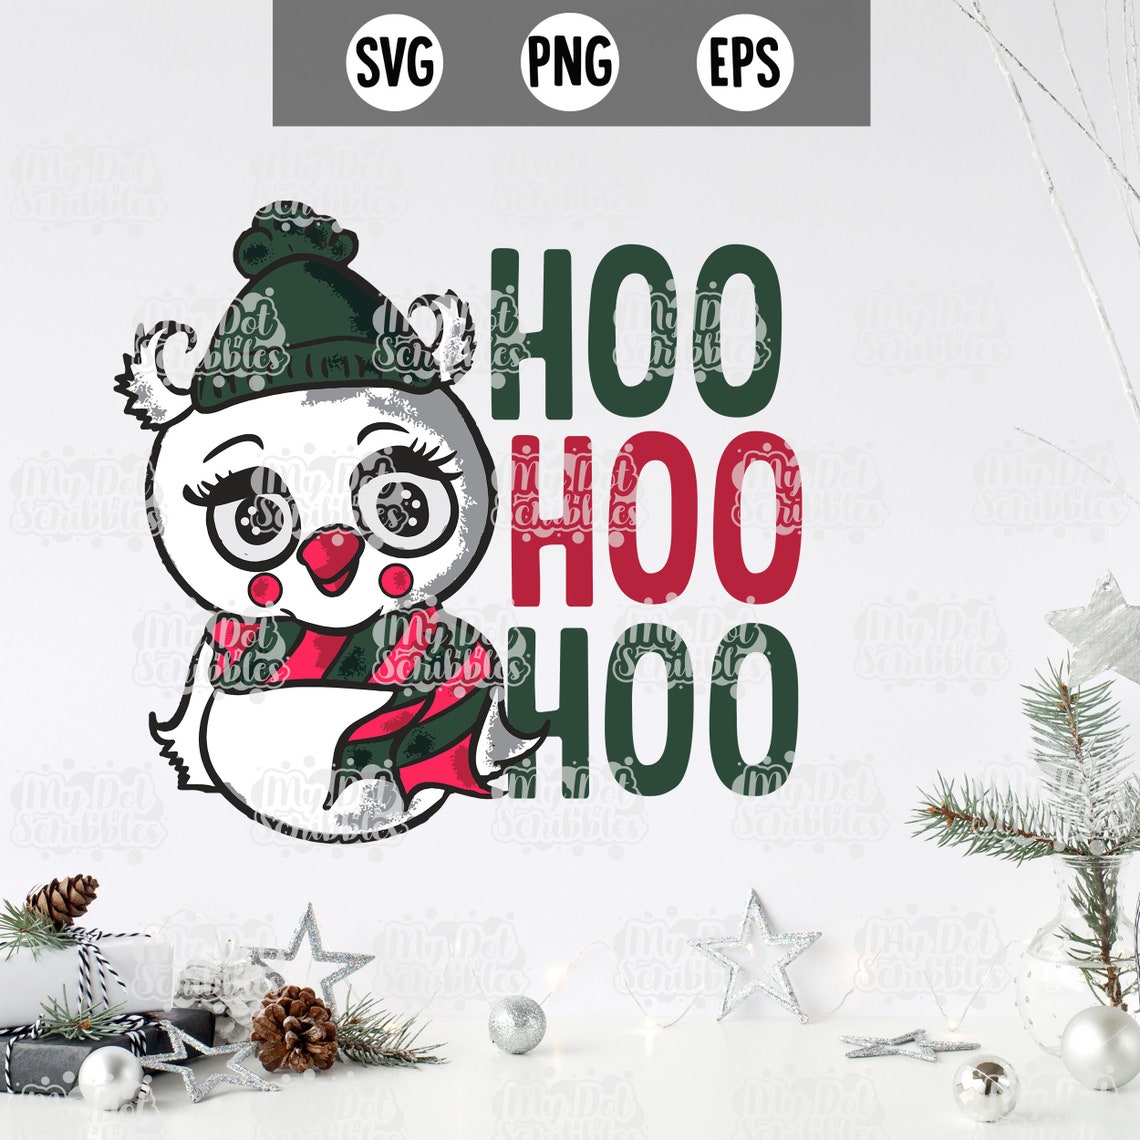 Christmas owl svg Owl svg png eps WInter clipart | Etsy